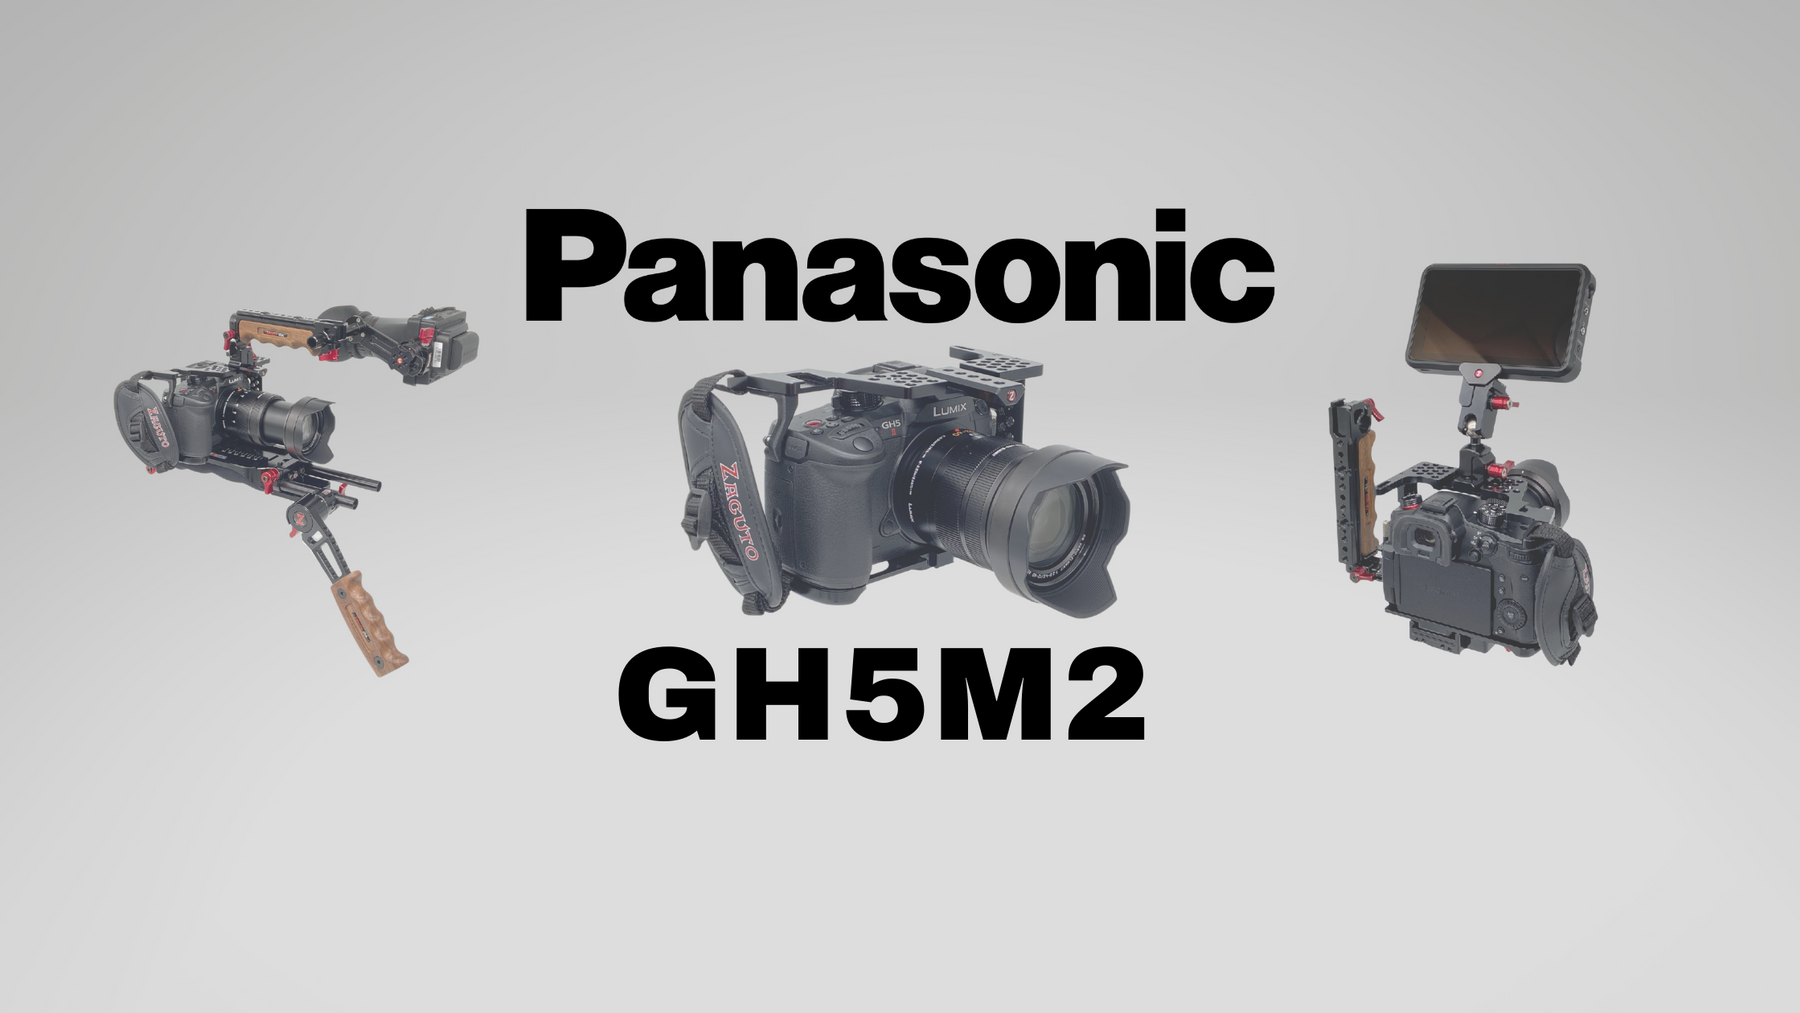 Panasonic releases the Lumix GH5M2 and GH6